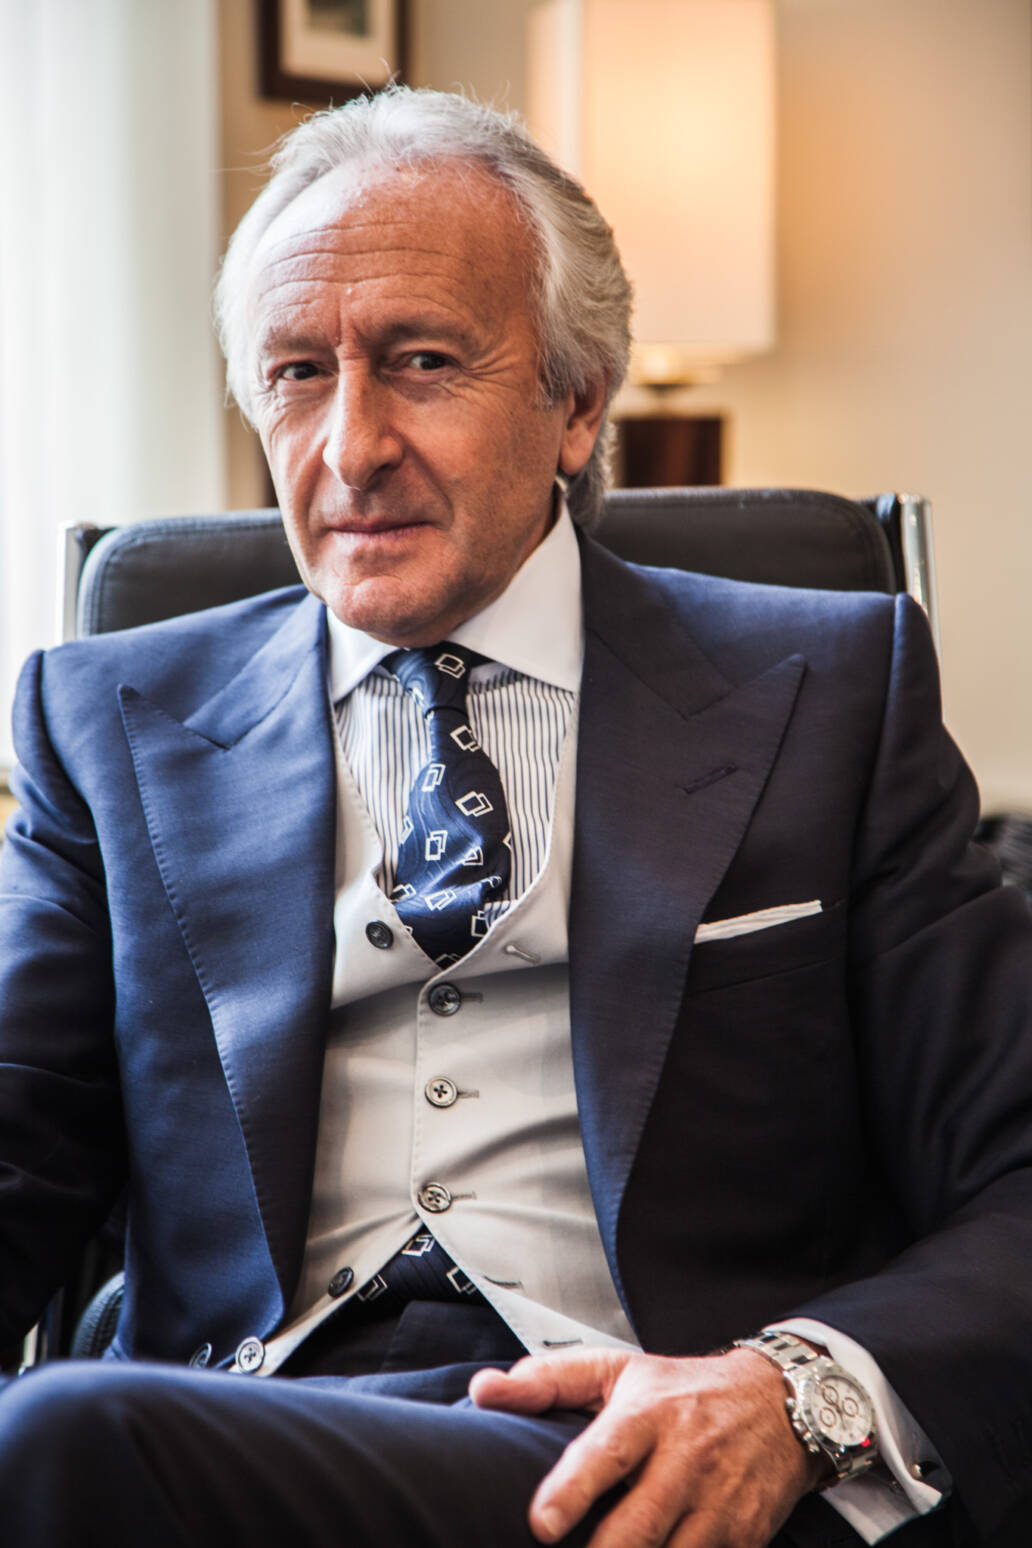 Harold Tillman CBE, former head of Jaeger and Aquascutum and chair of the British Fashion Council